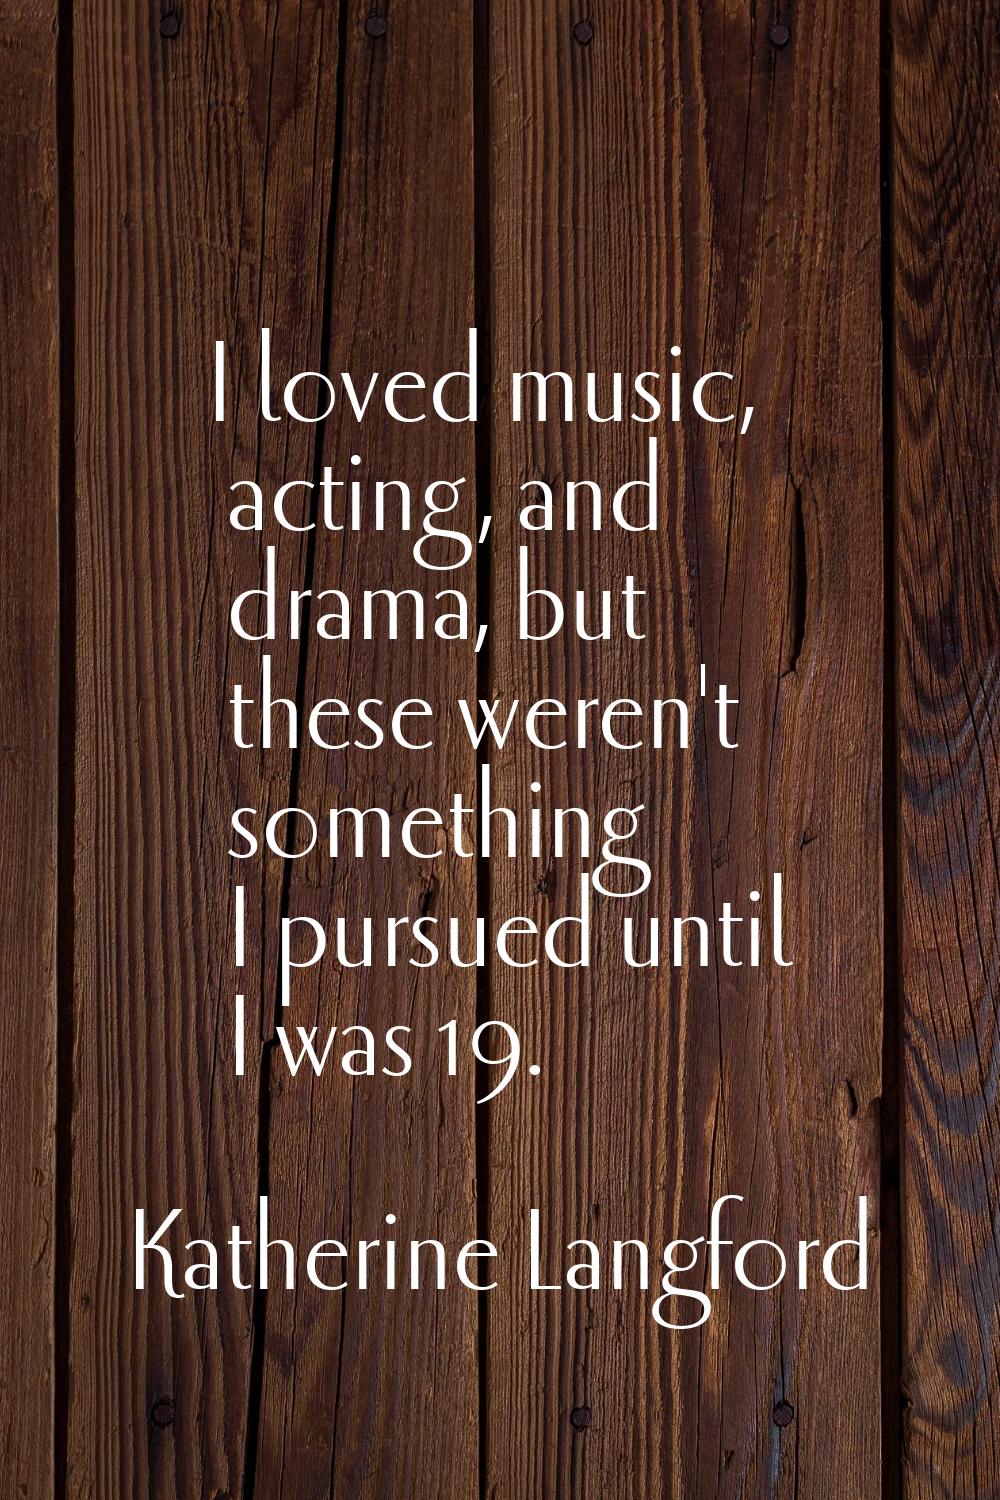 I loved music, acting, and drama, but these weren't something I pursued until I was 19.